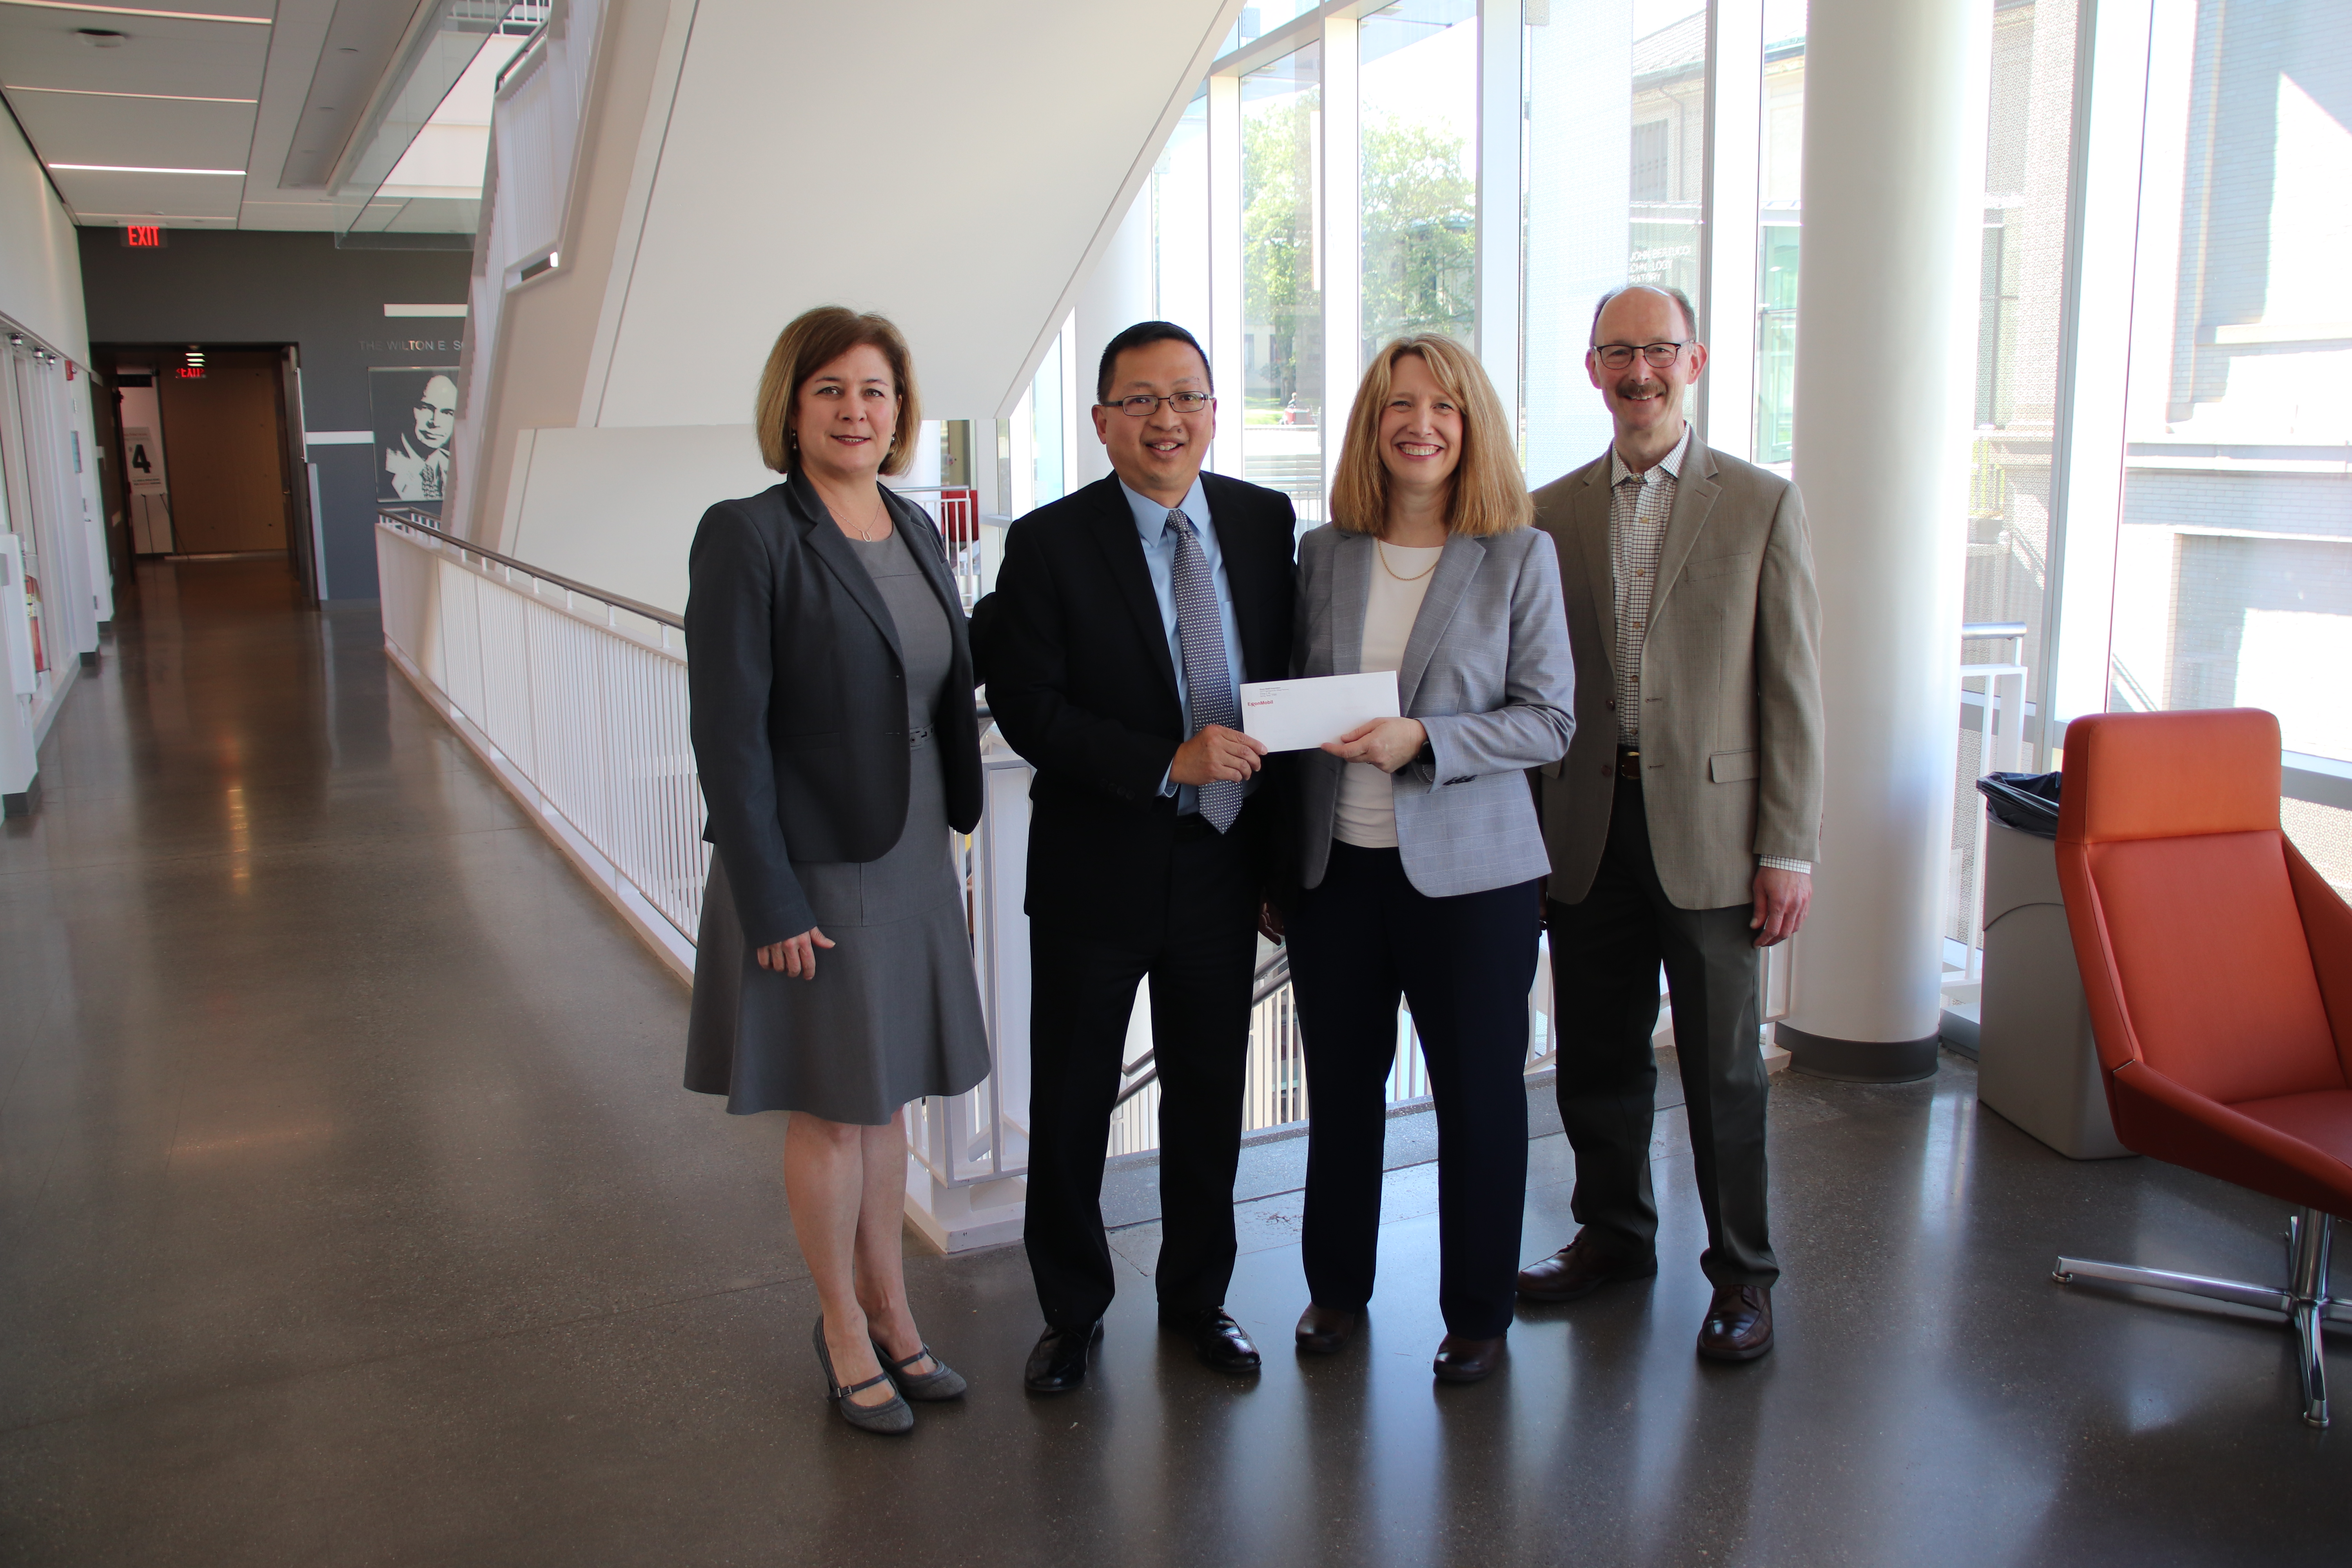 William Wang poses with Anne Robinson and other university representatives